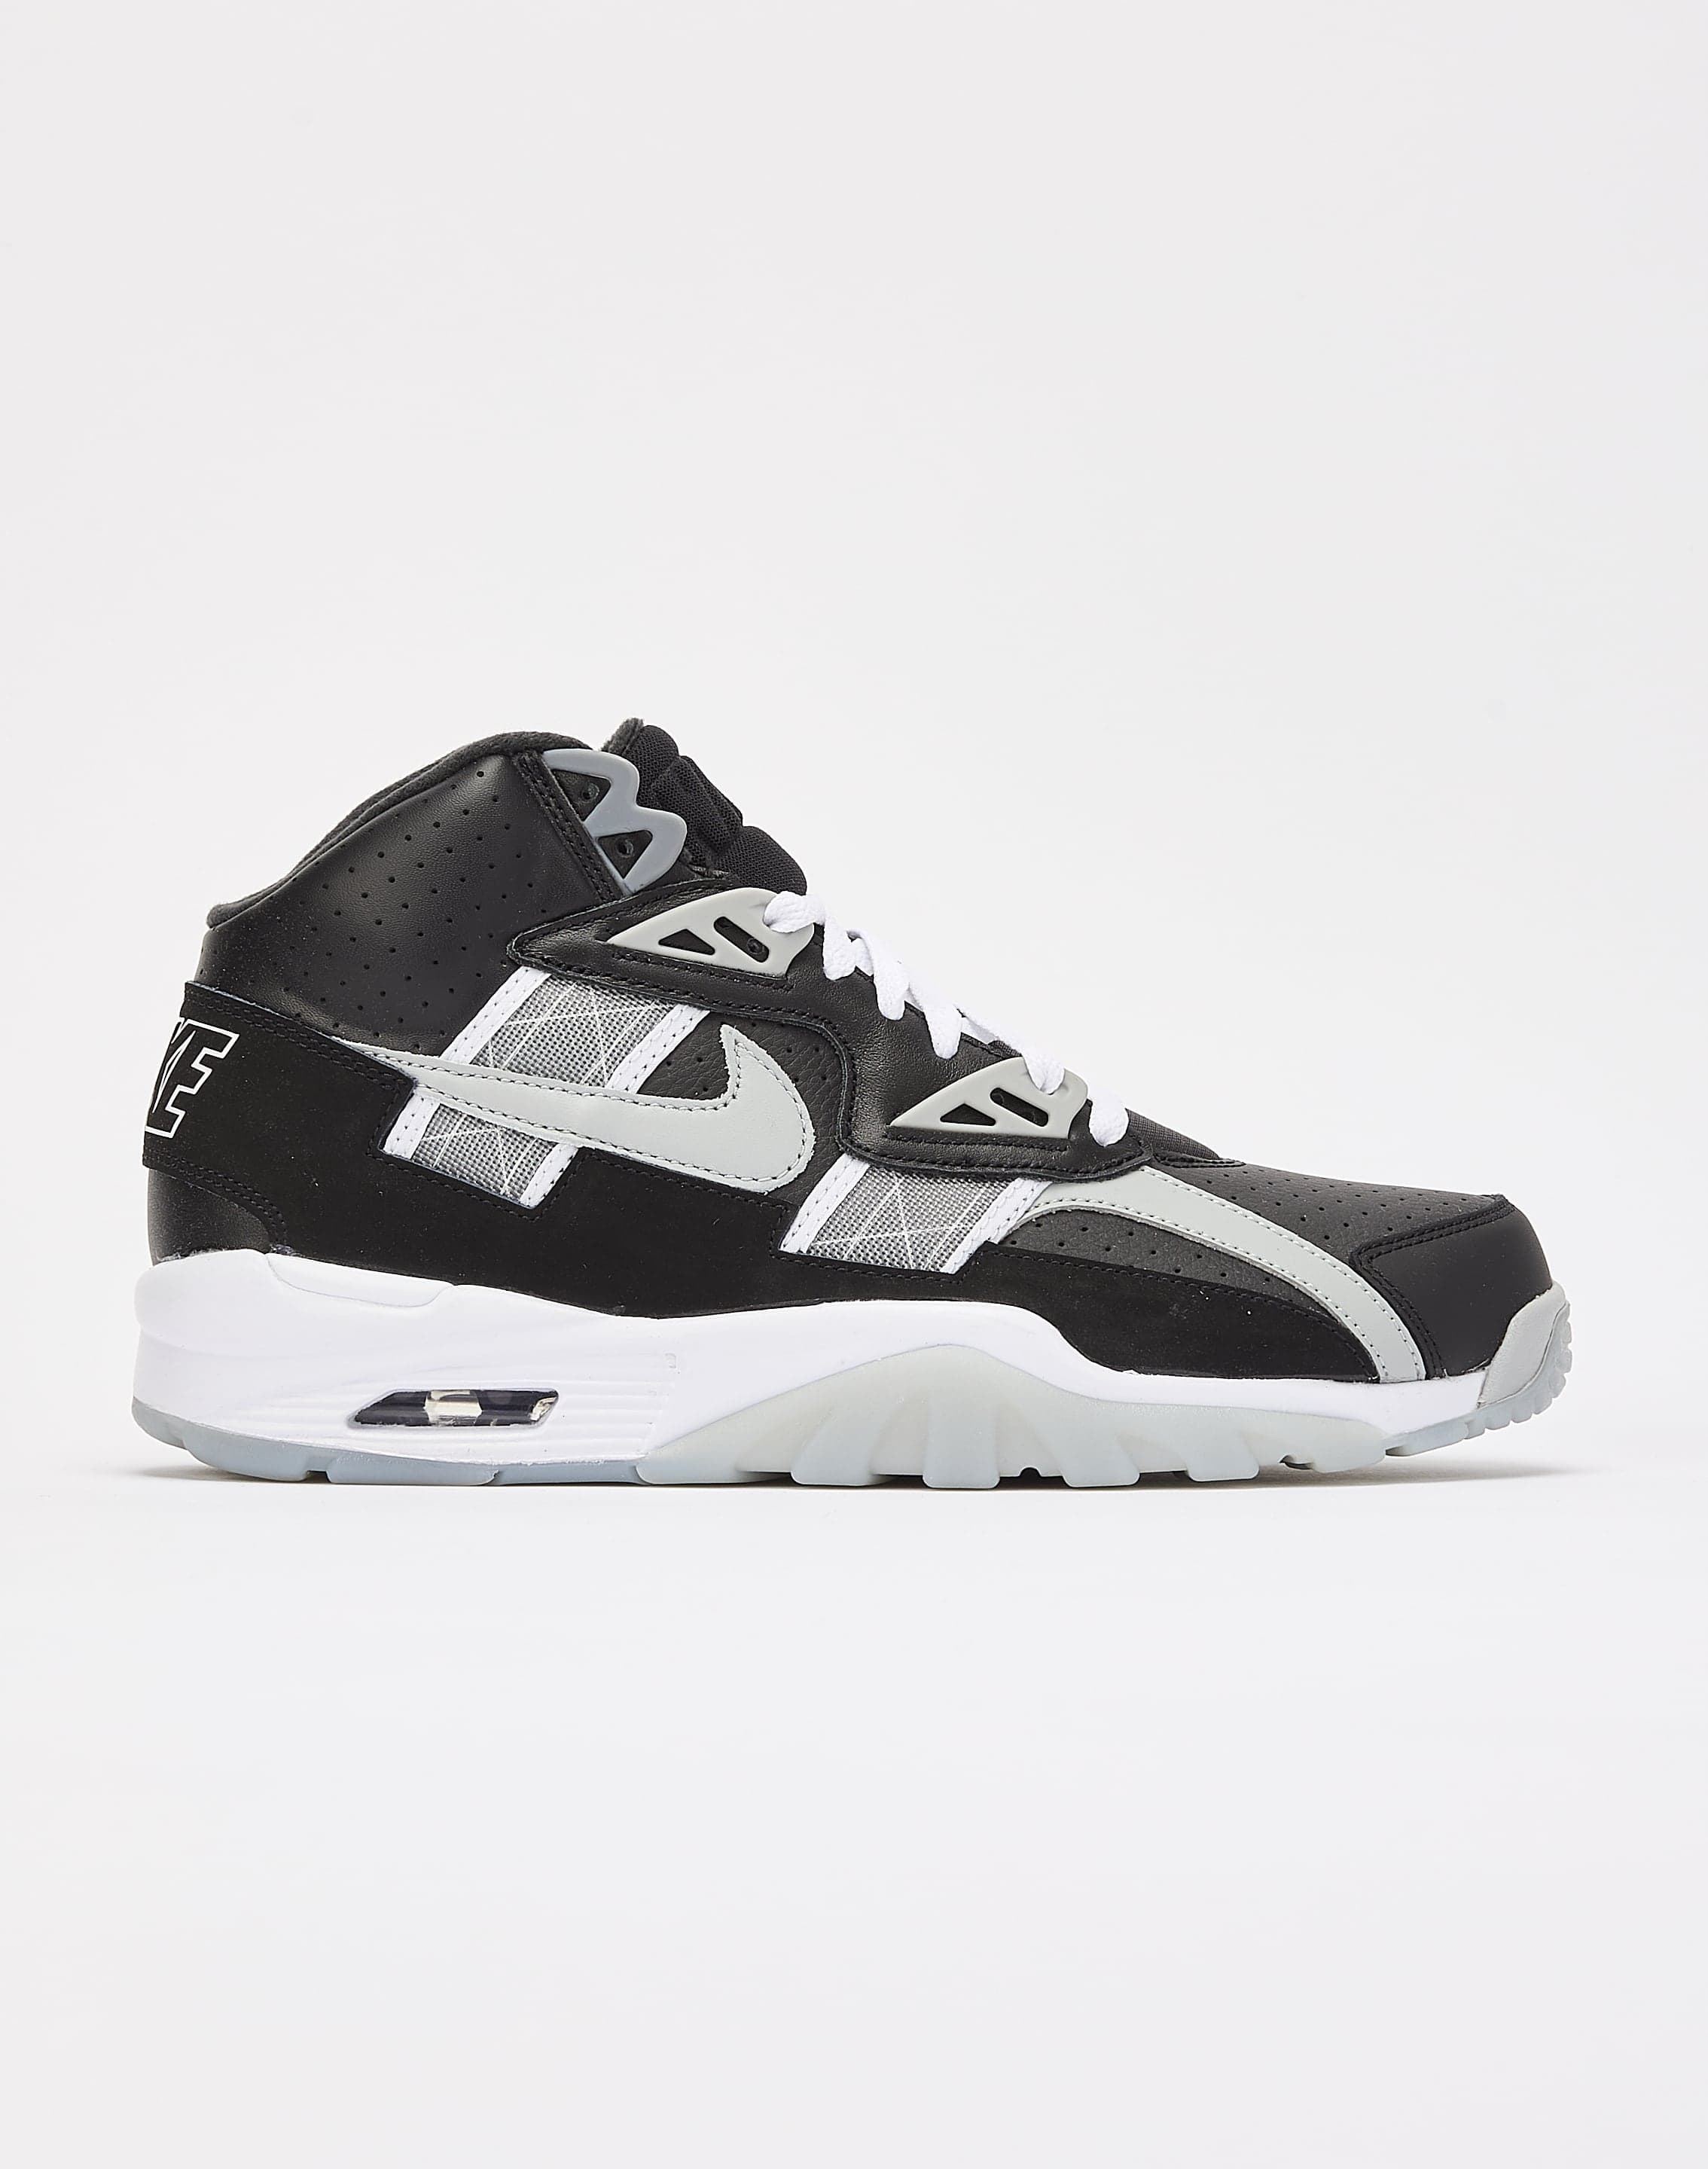 Bo Knows the Upcoming Nike Air Trainer SC High “Raiders” – DTLR